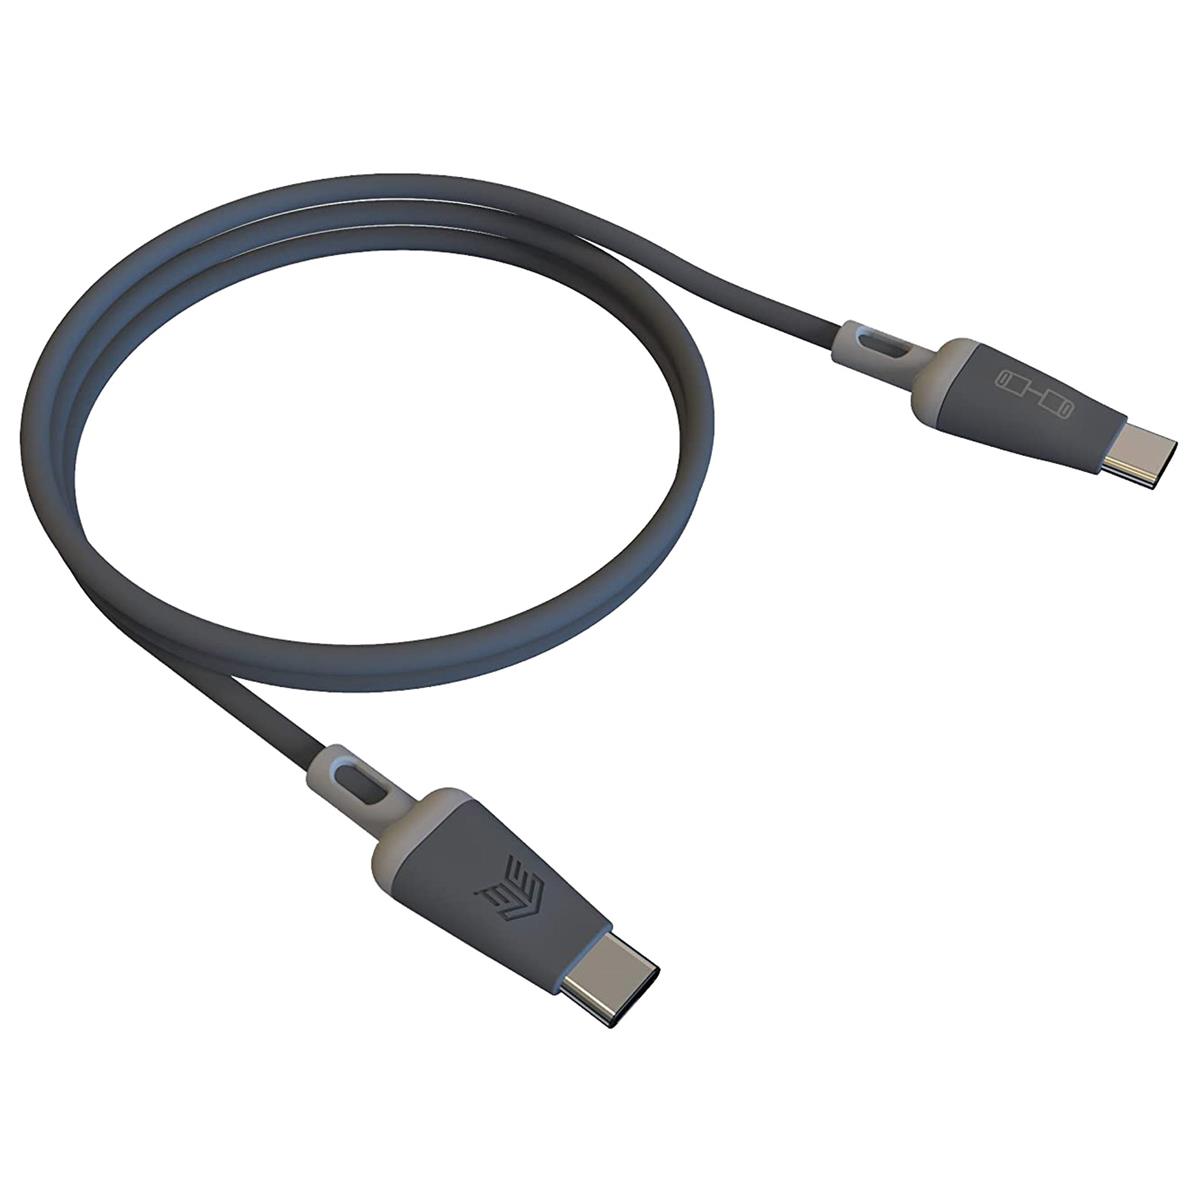 Image of STM Able Cable USB-C to USB-C